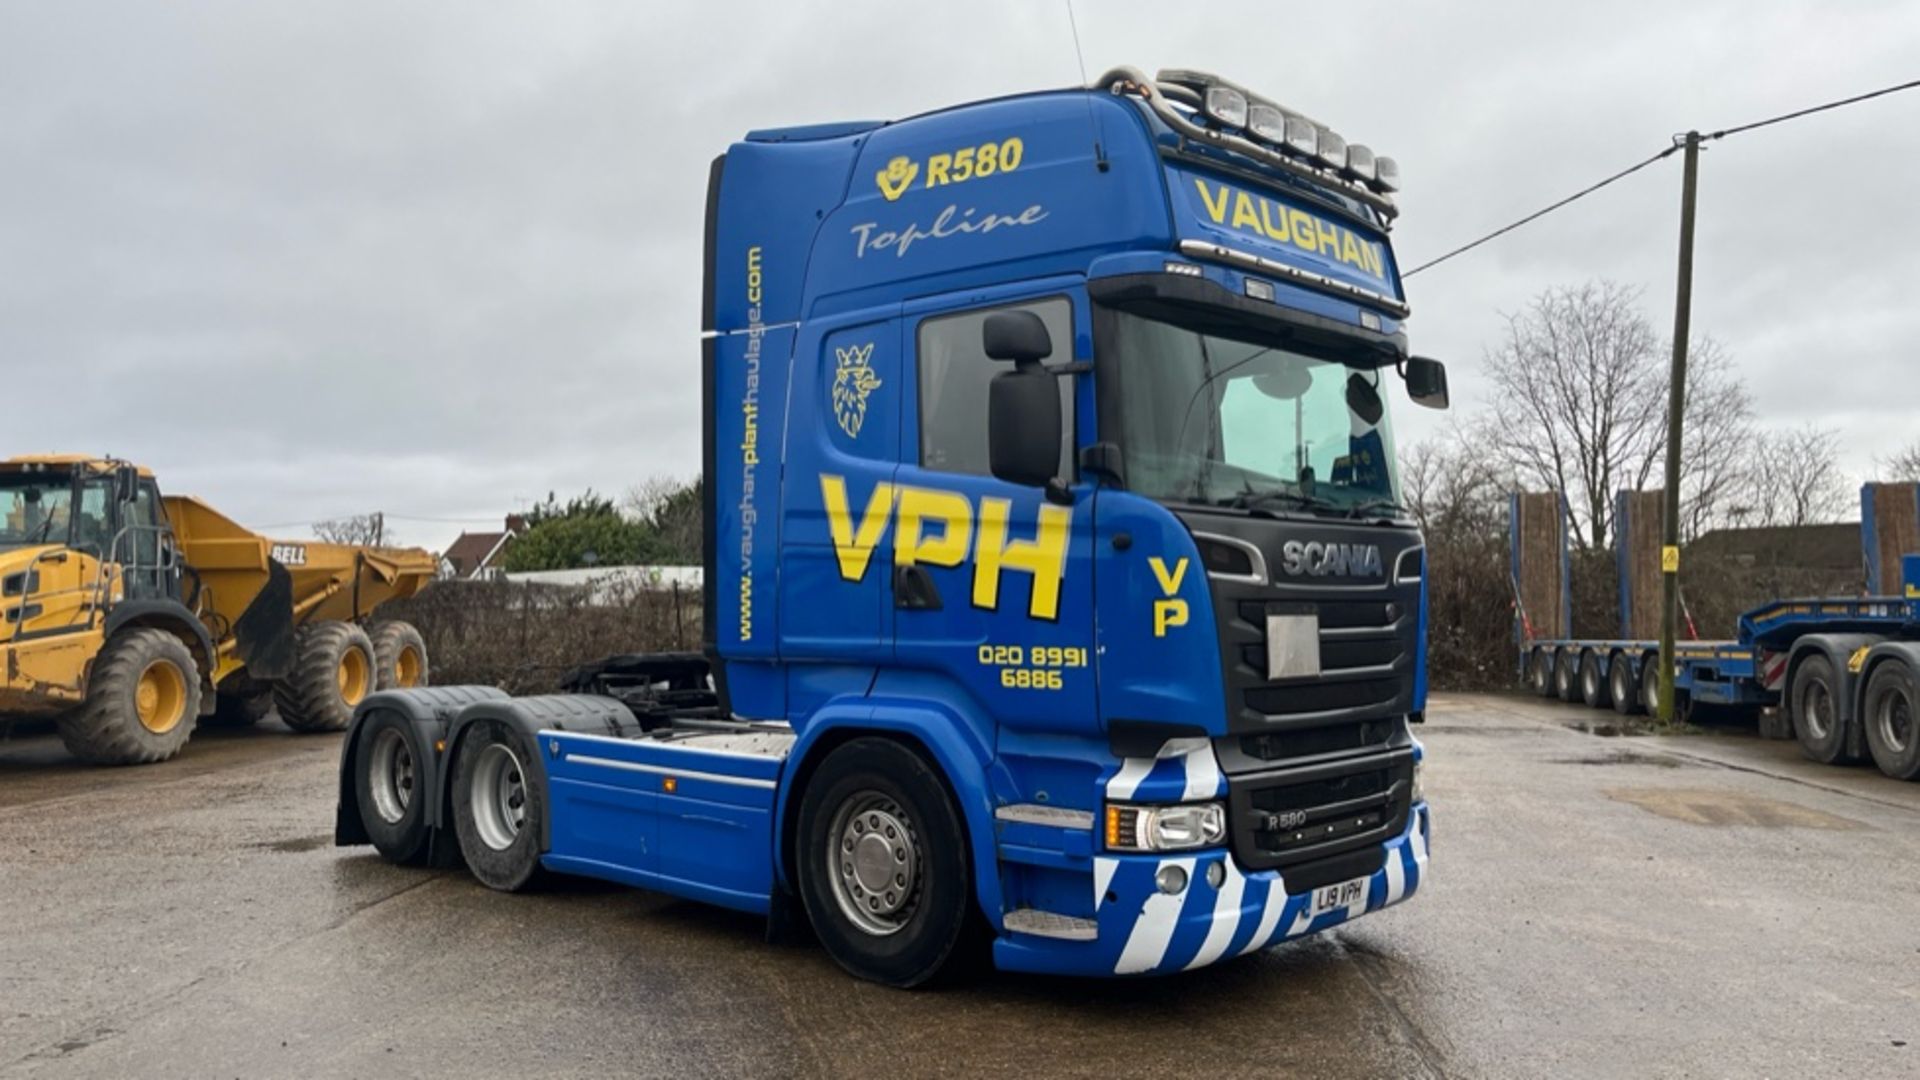 SCANIA R 580 V8 EURO 6 72 TONNE Tractor Unit 6x2 (Year 2018) - Image 17 of 28